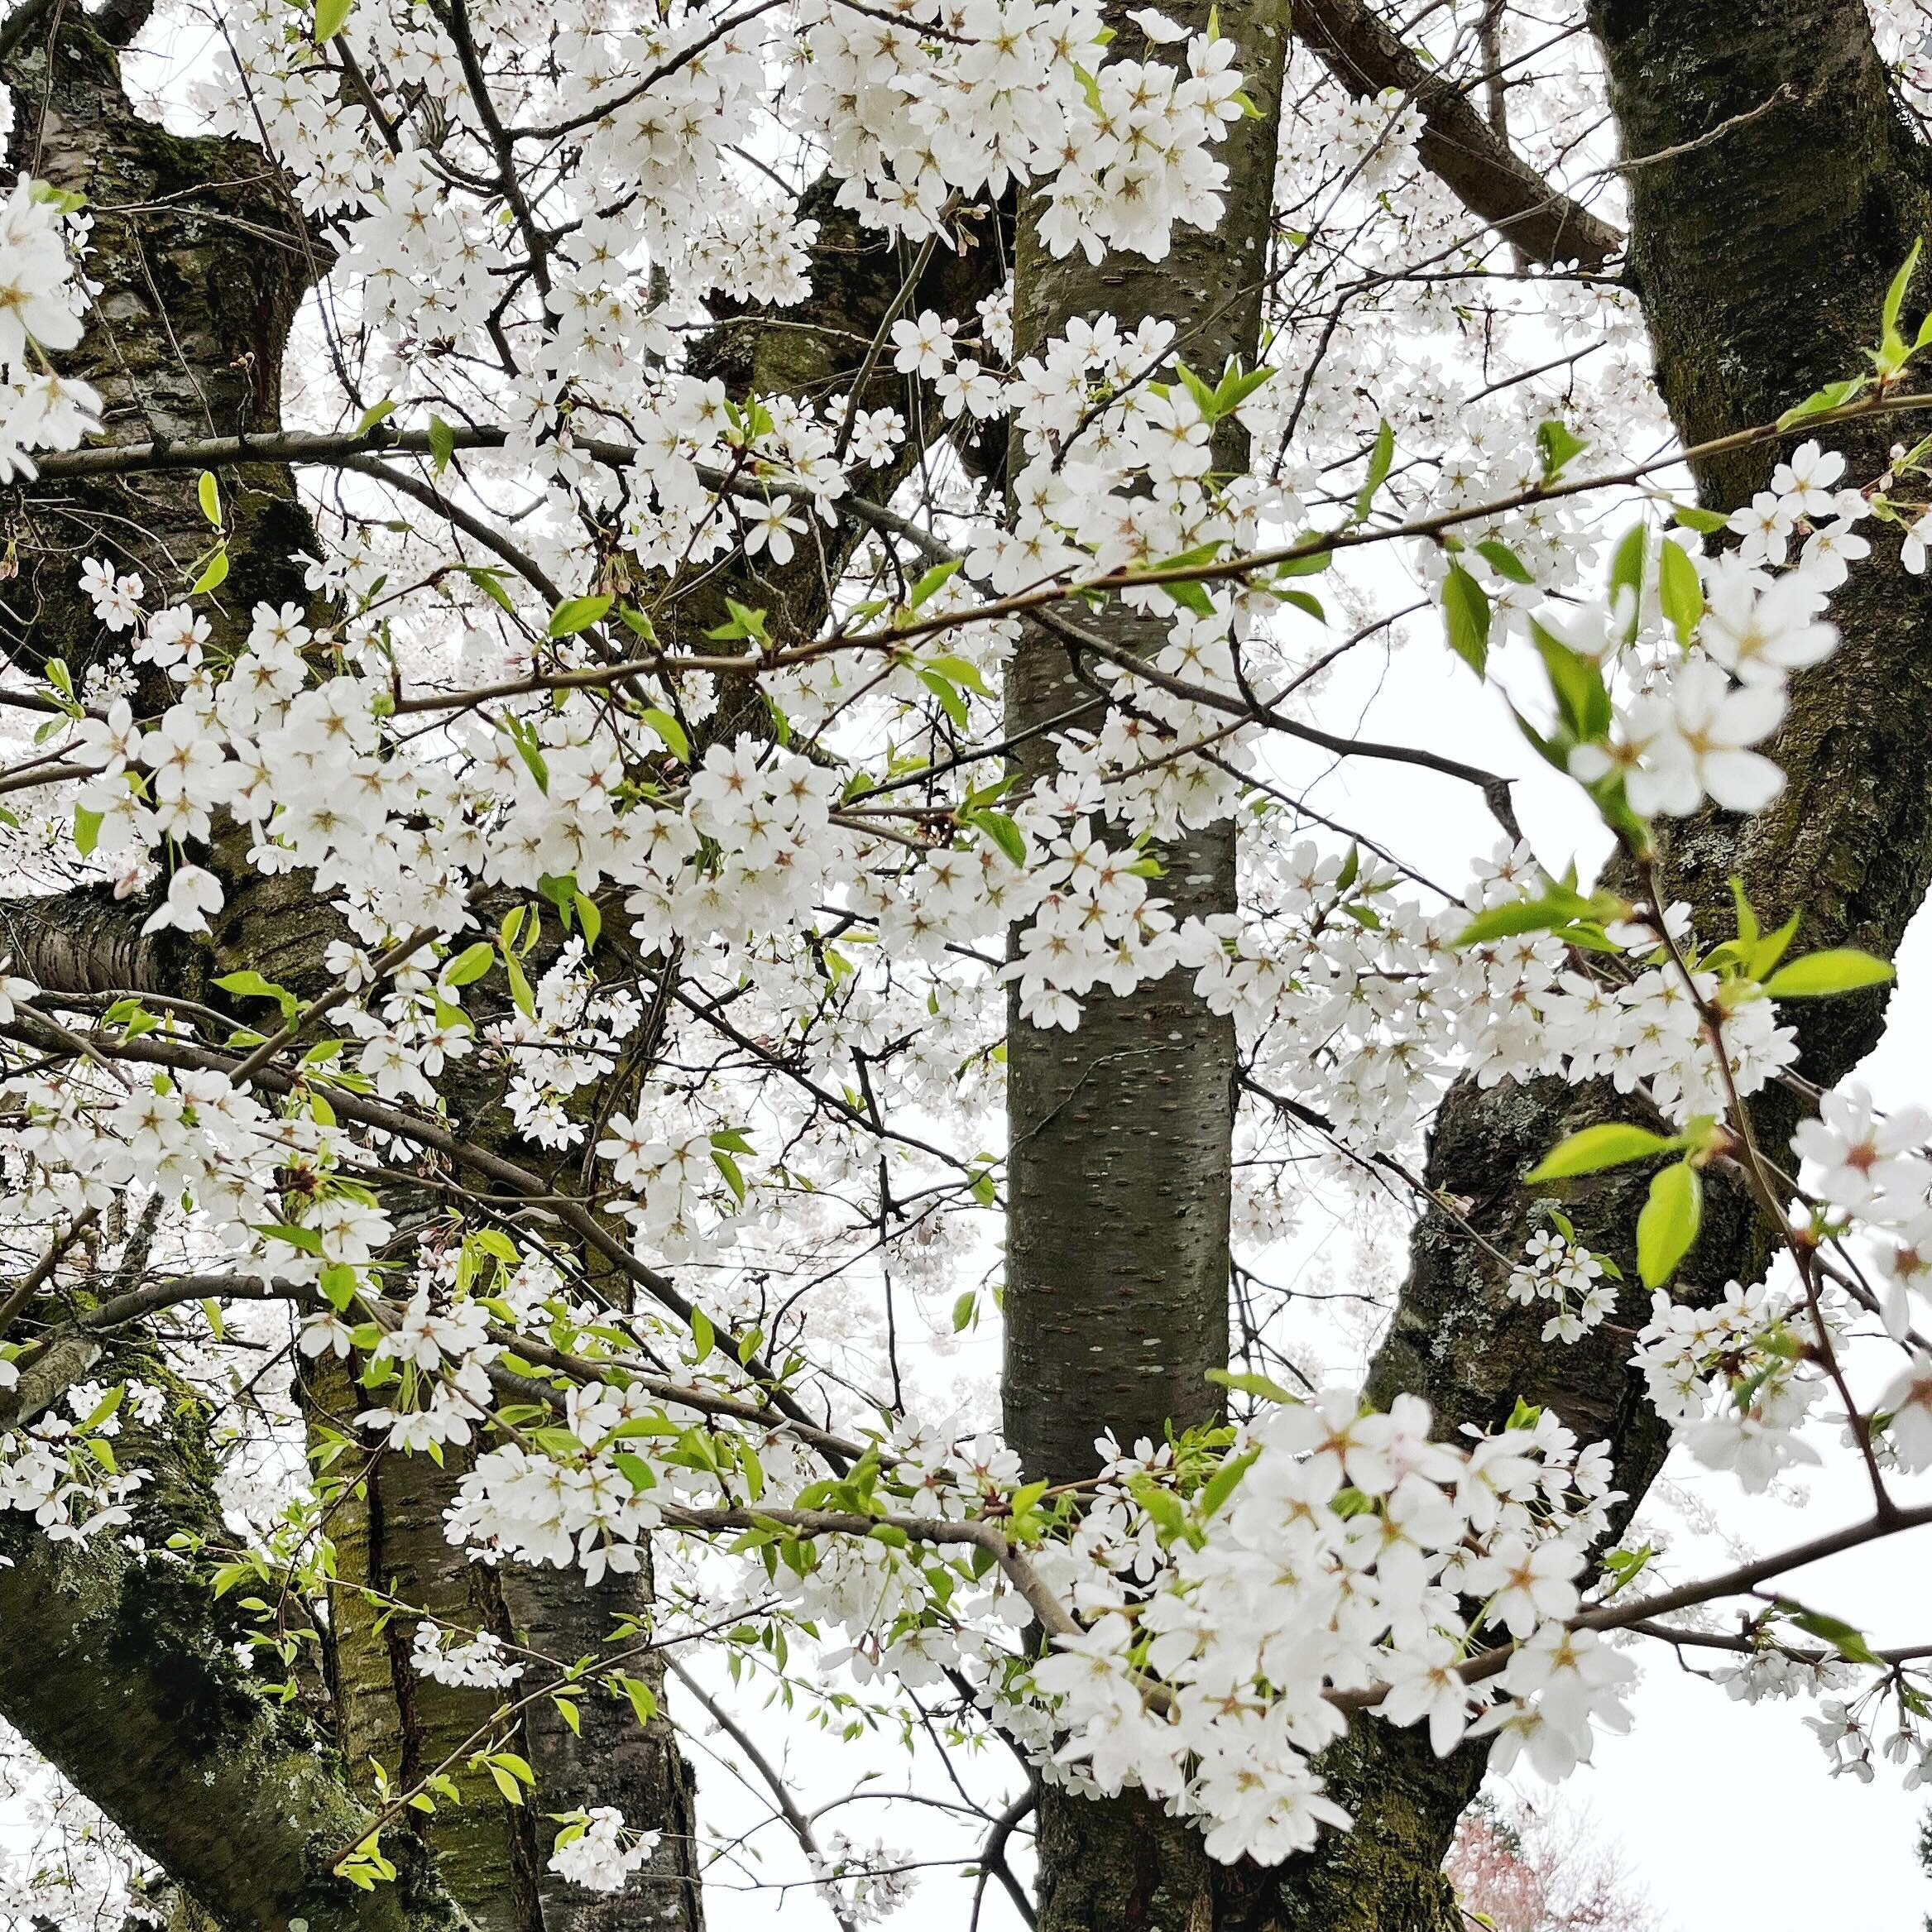 These beautiful cherry blossoms in Bellingham remind us that the stone is about to be rolled away! Join us for Easter Vigil, a very special ancient service tonight at 7 pm!